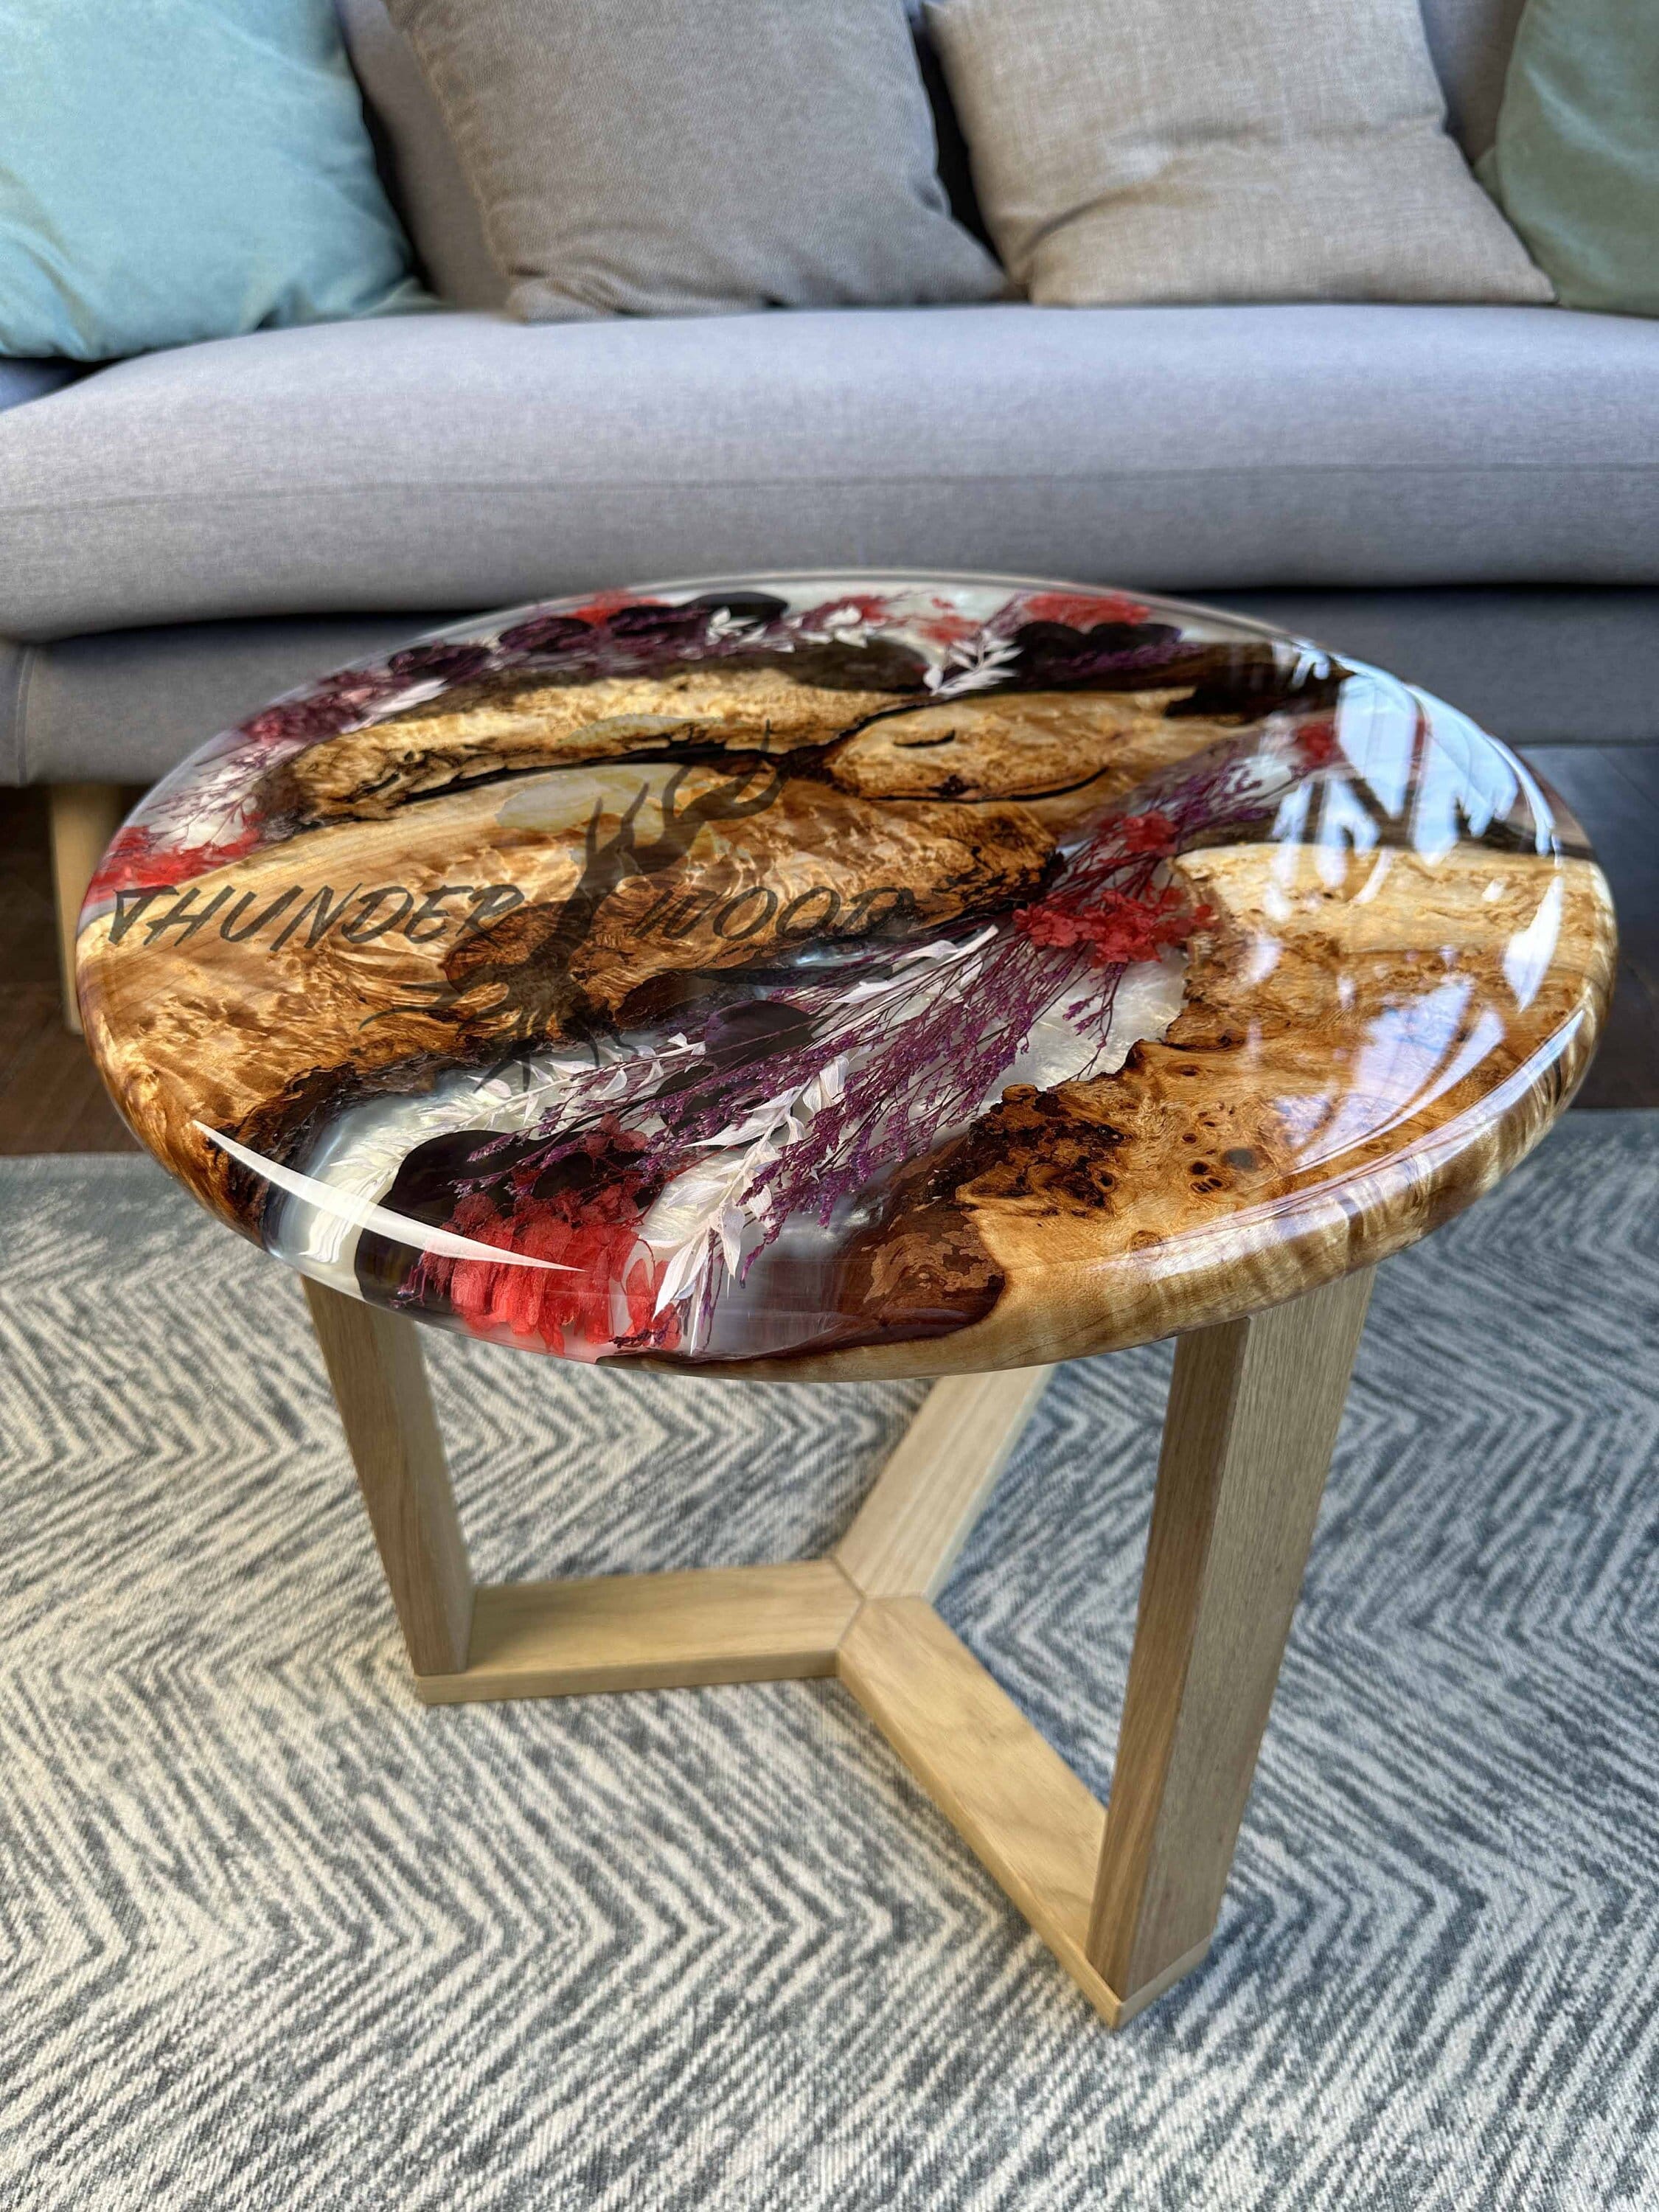 Pour Your Own Epoxy™ Coffee Table